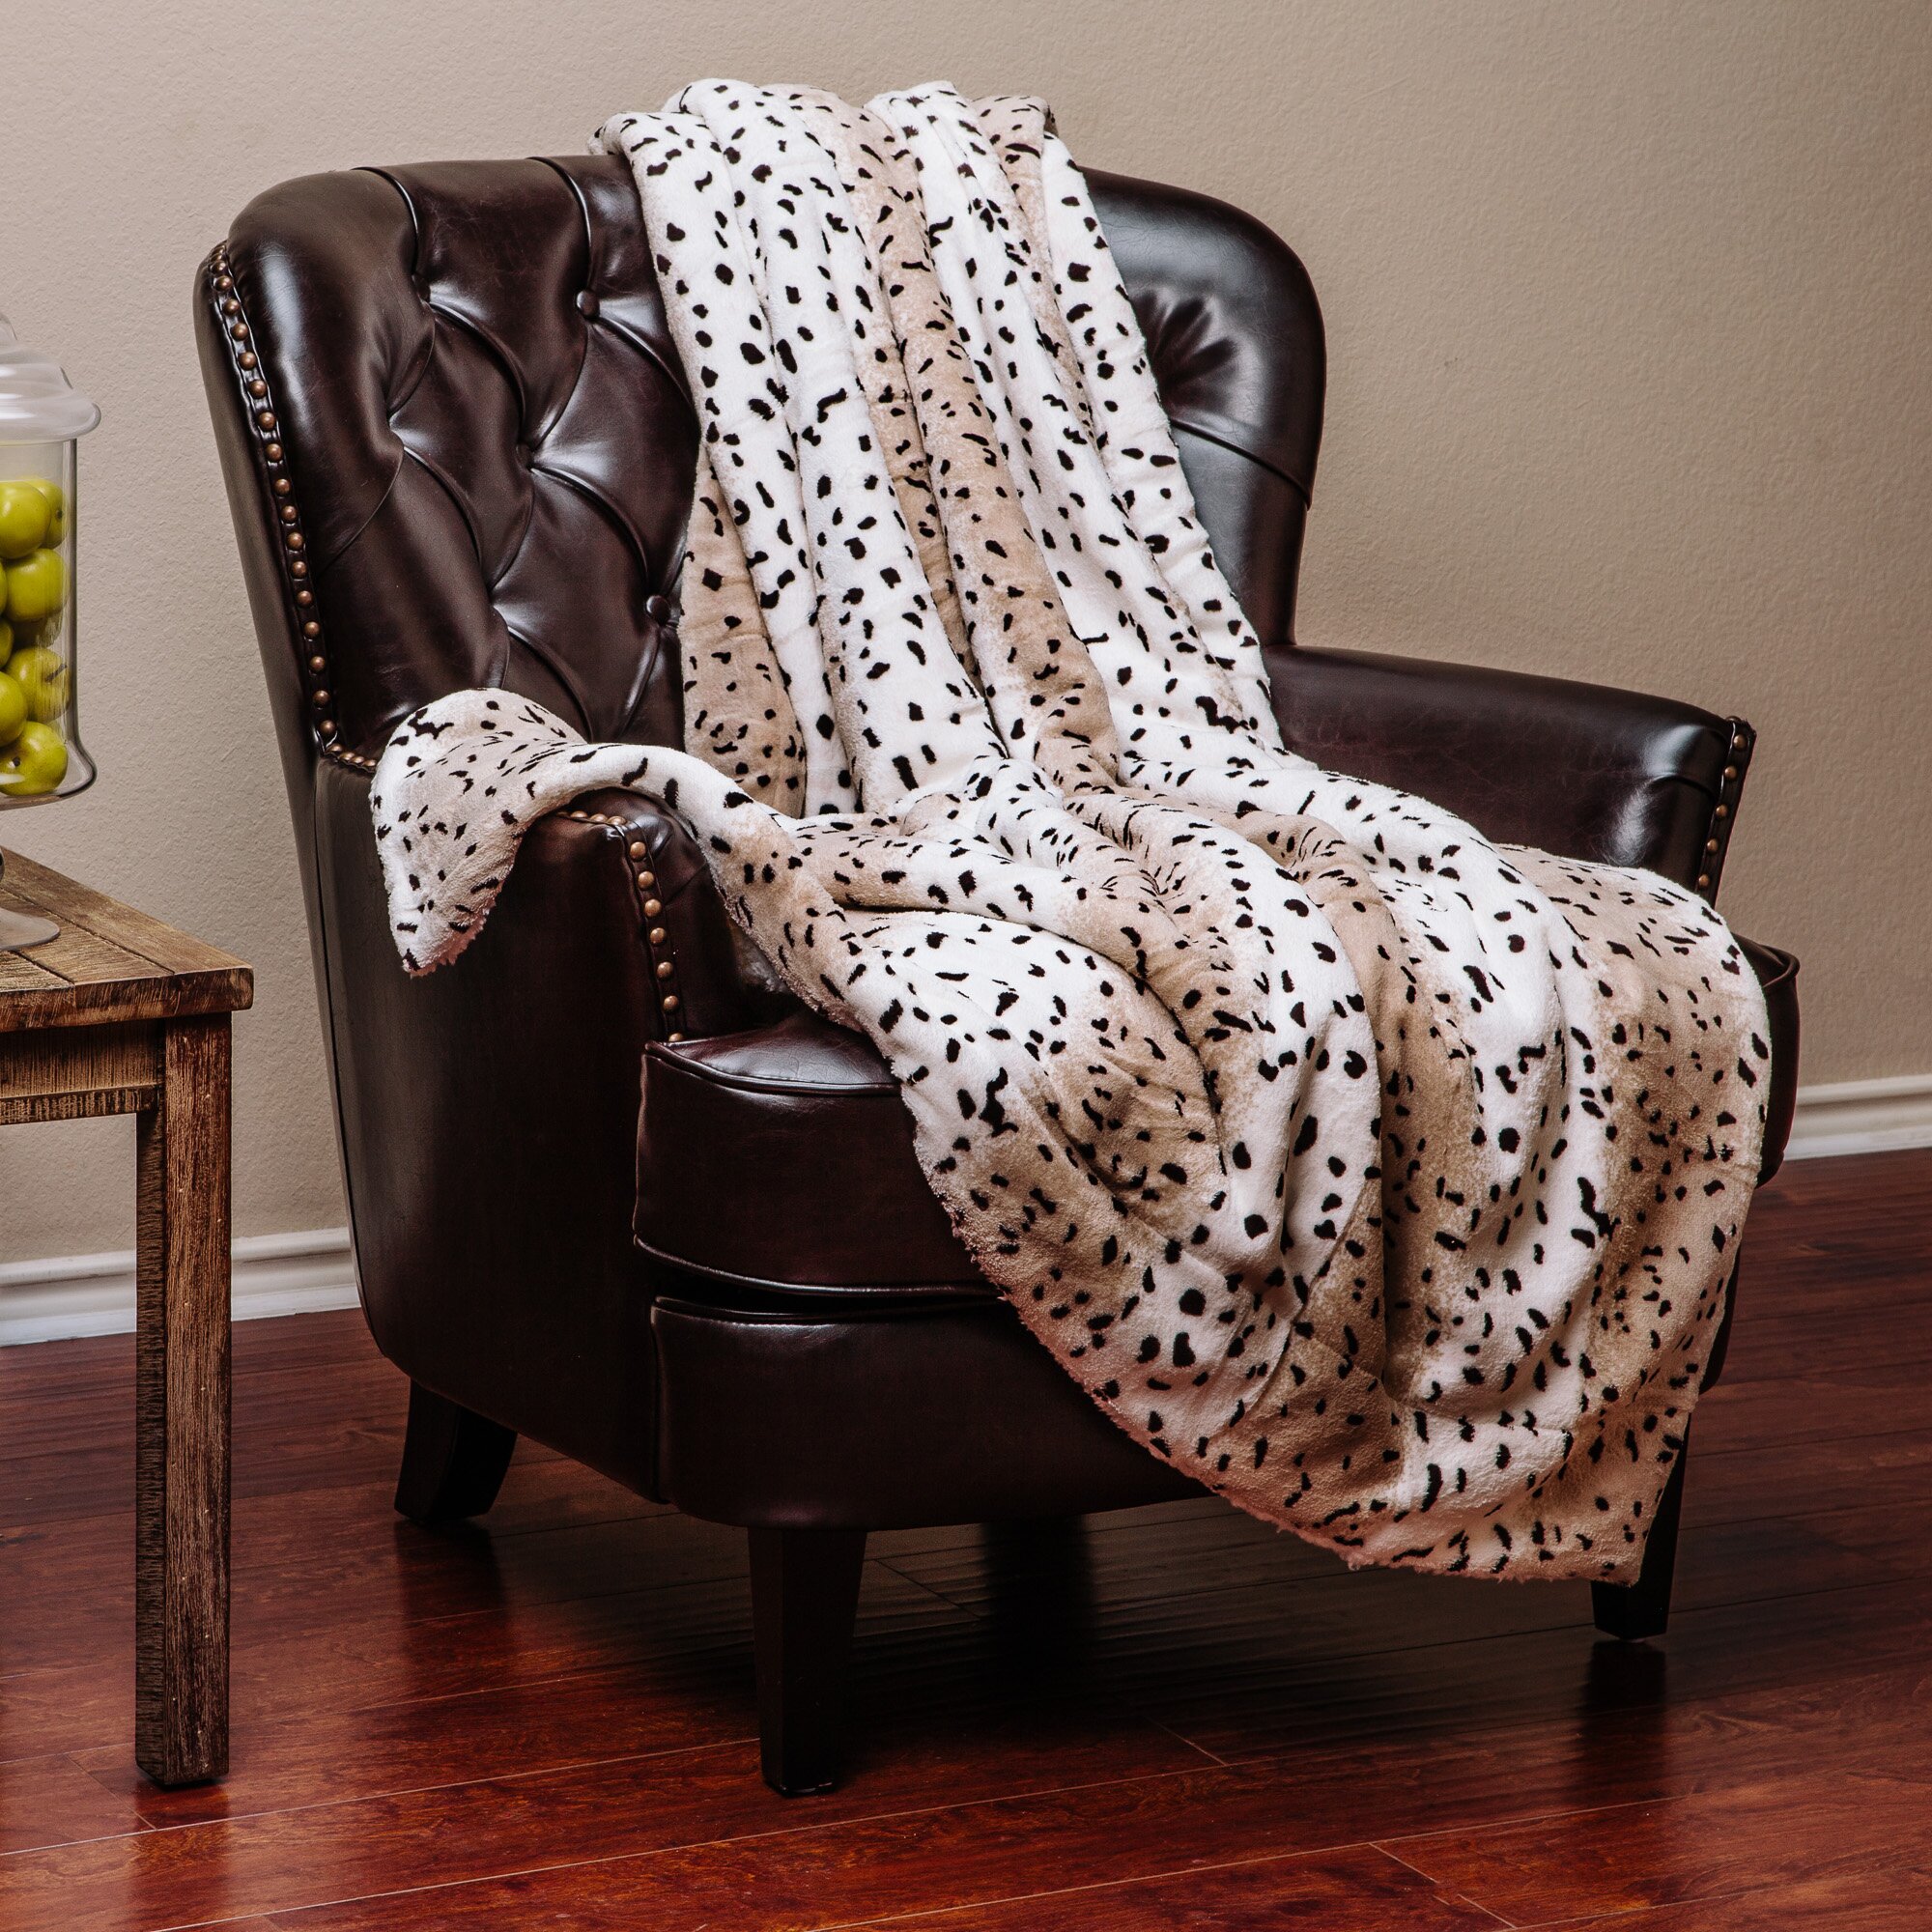 36 best images about cheetah throw blanket on Pinterest ...